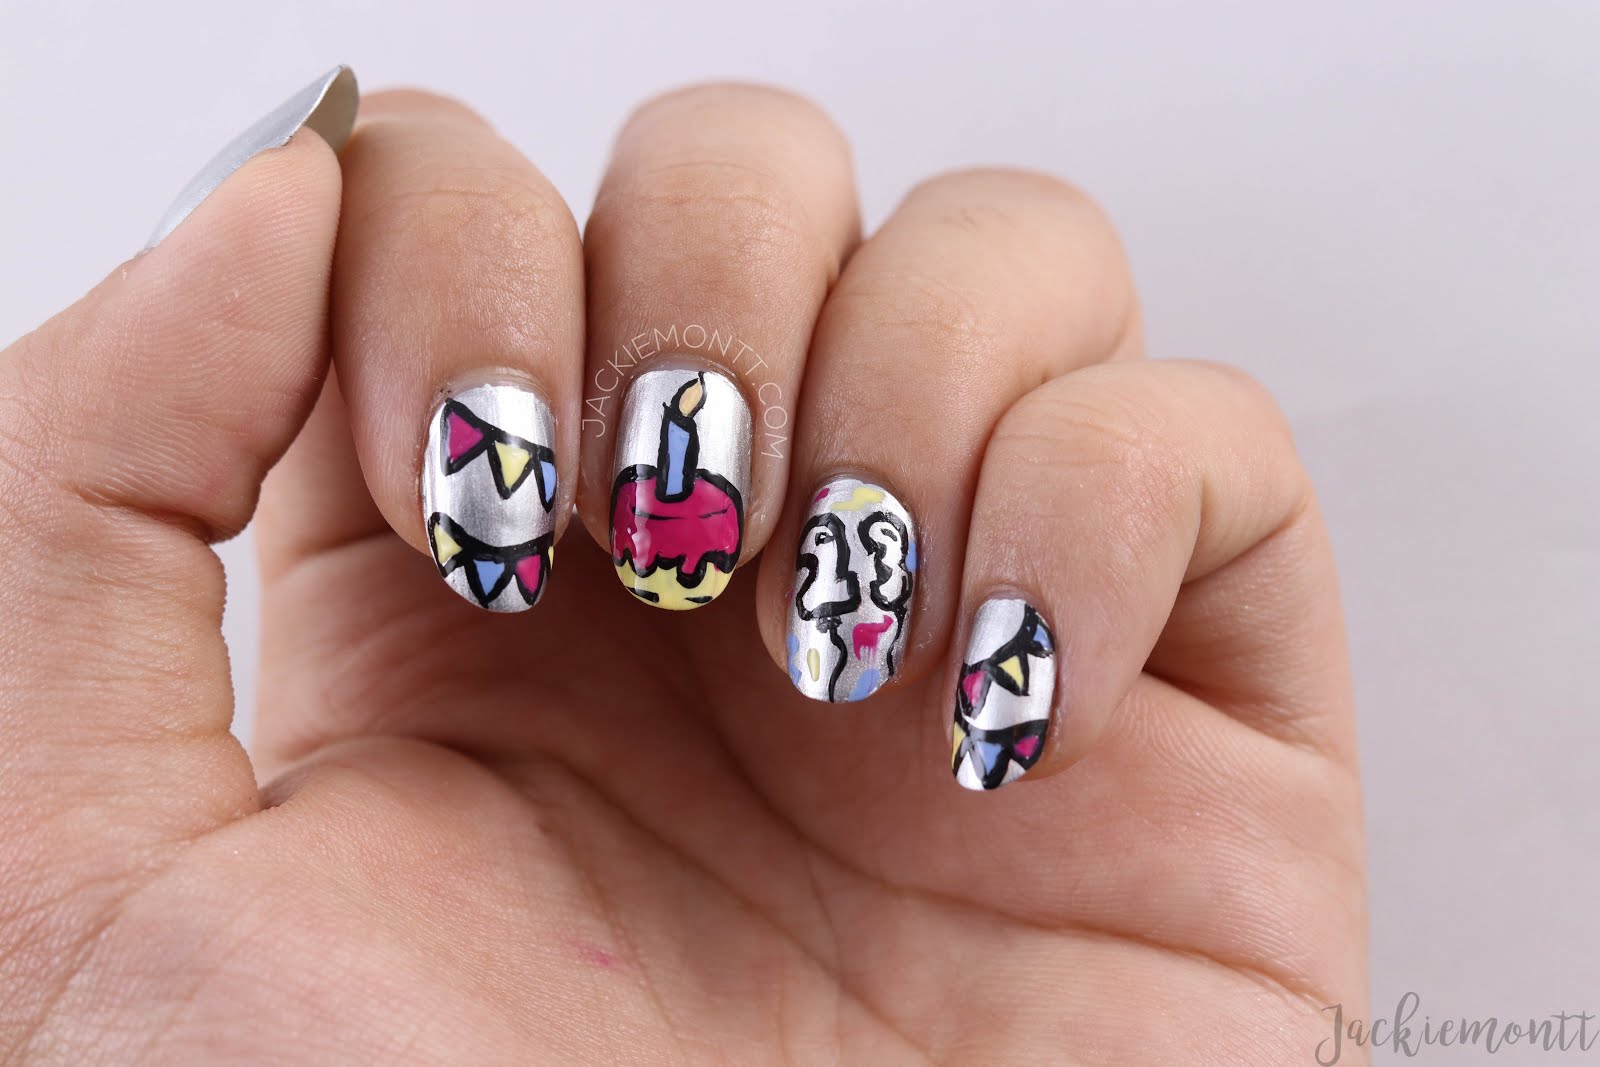 5. Colorful Birthday Nail Art - wide 7